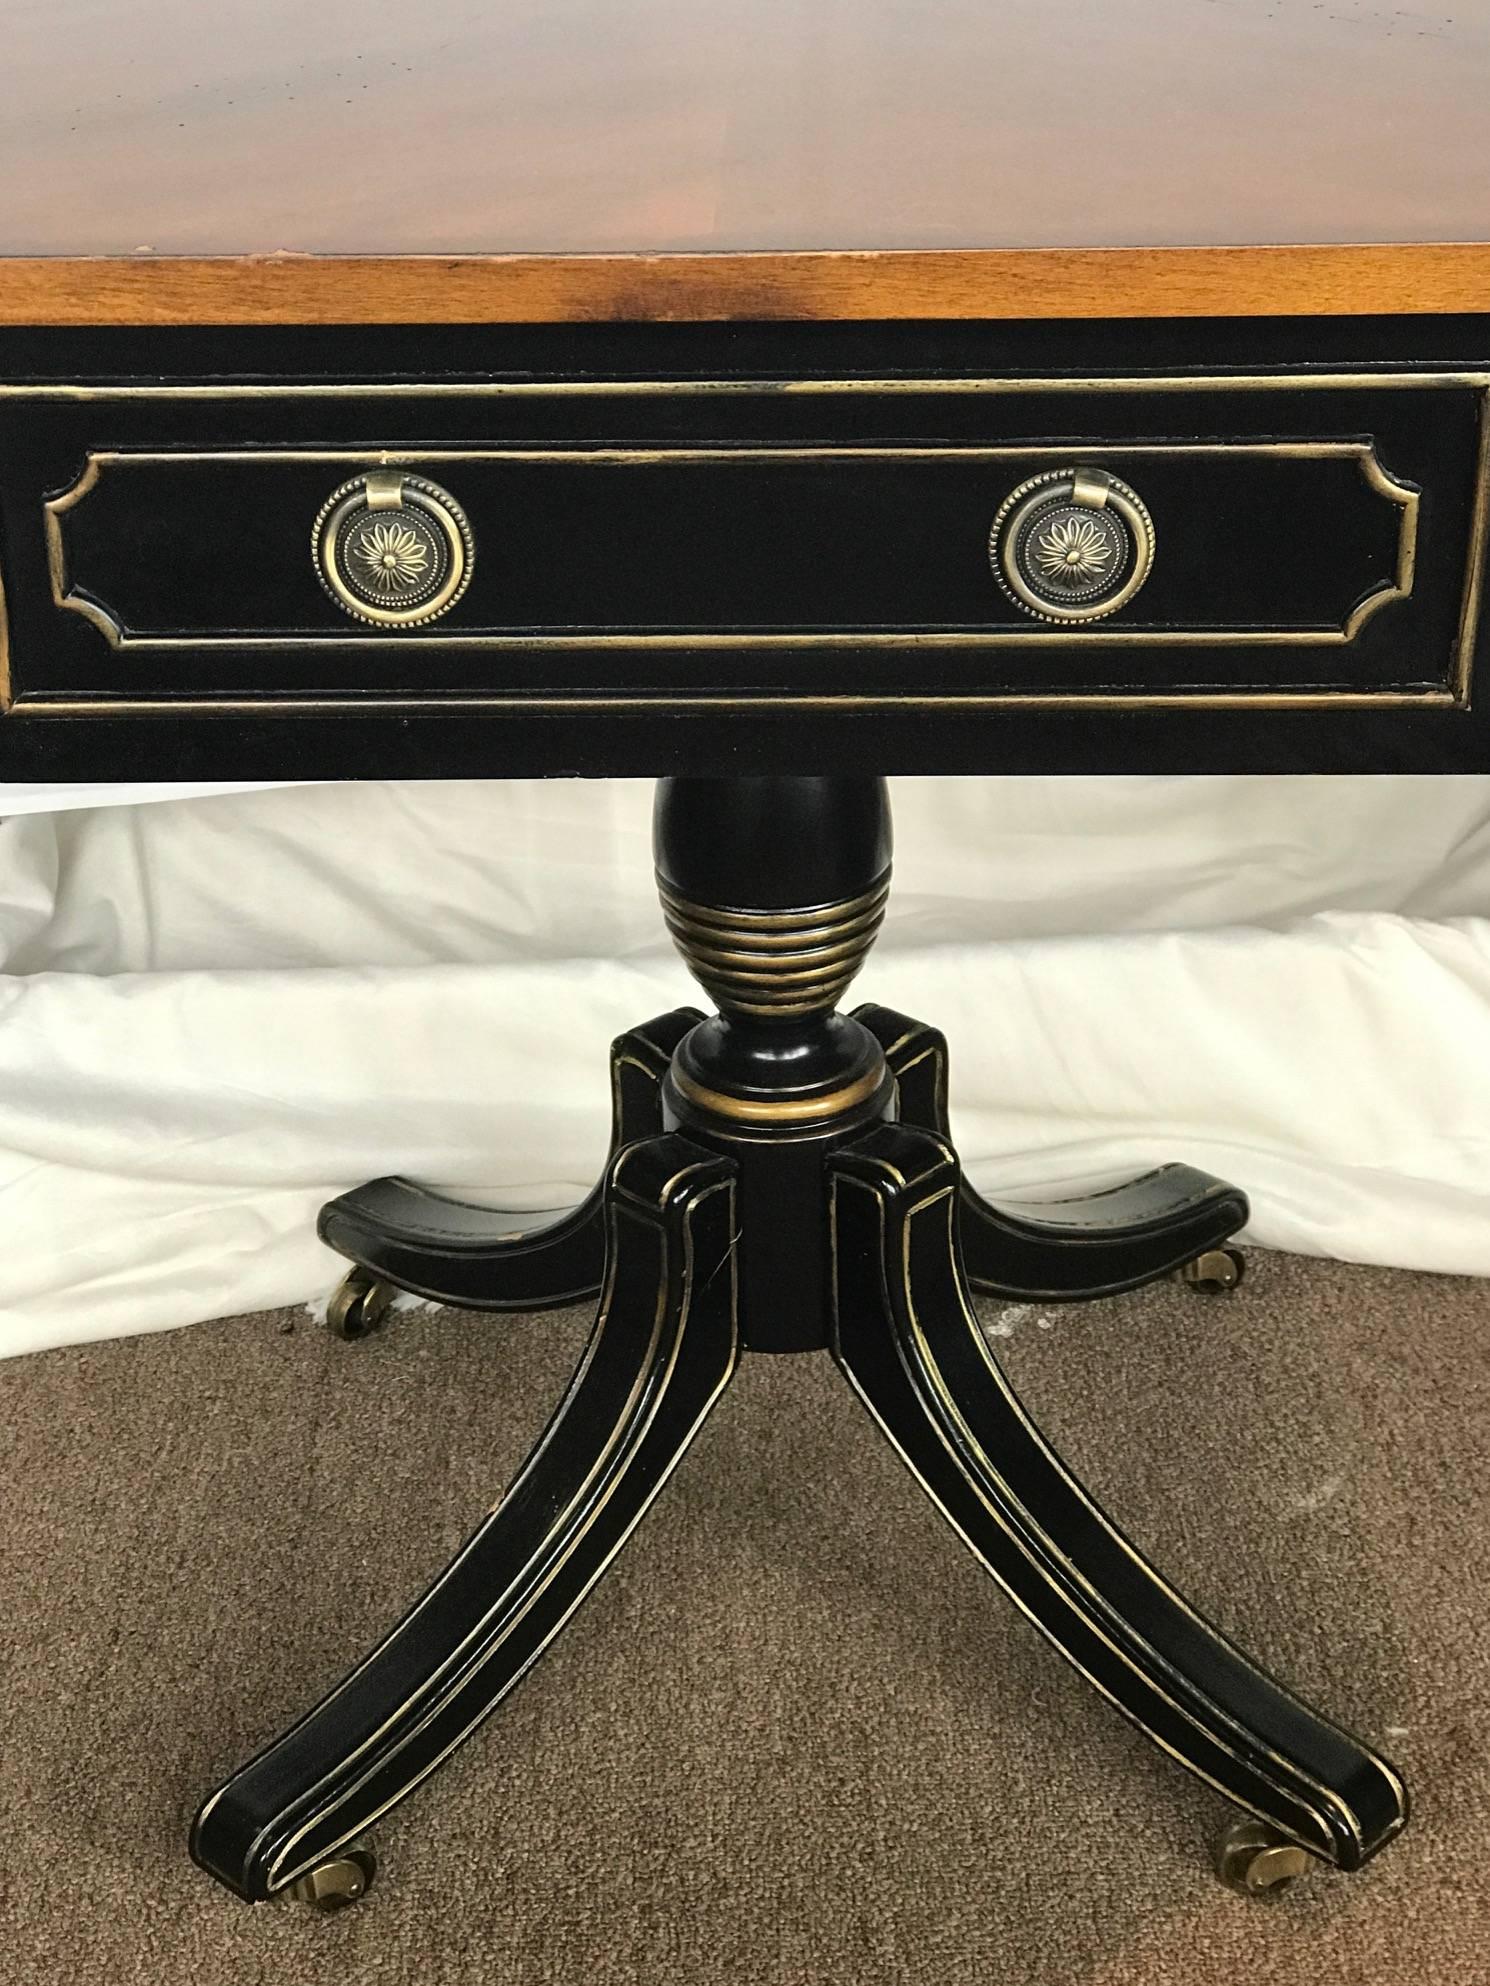 On Sale Now!  Neoclassical style ebony and gilt rent collector's table with gilt gold accents and brass pulls. Beautifully set on a tripod base that sits on wheels. The top is octagon shaped and follows down to false drawers on the front and back